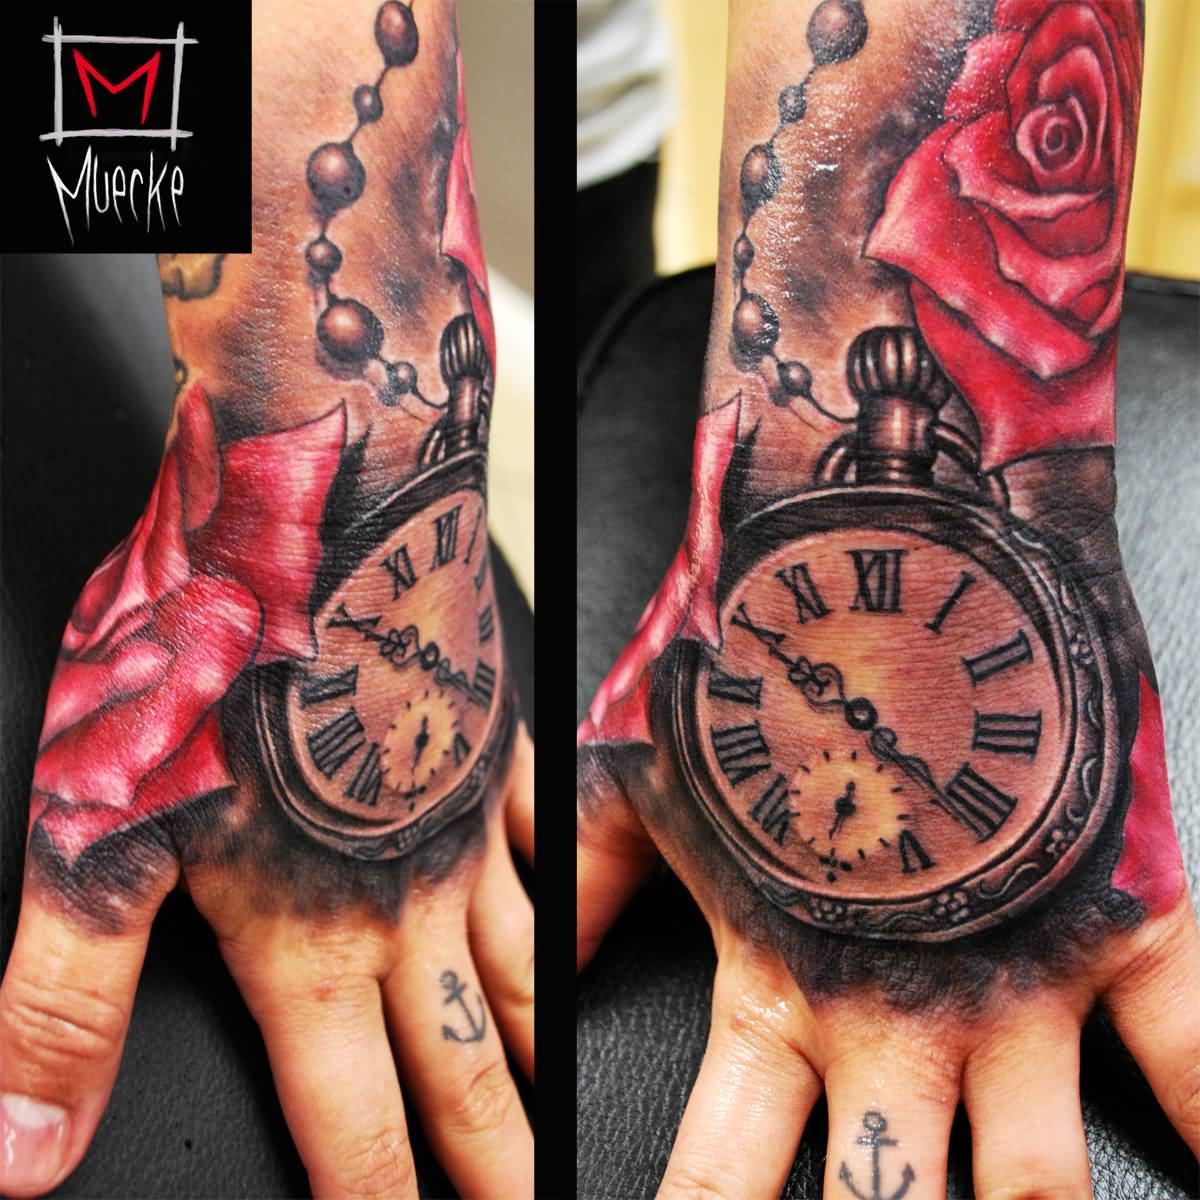 Awesome Red Rose And Clock Tattoo On Left Hand